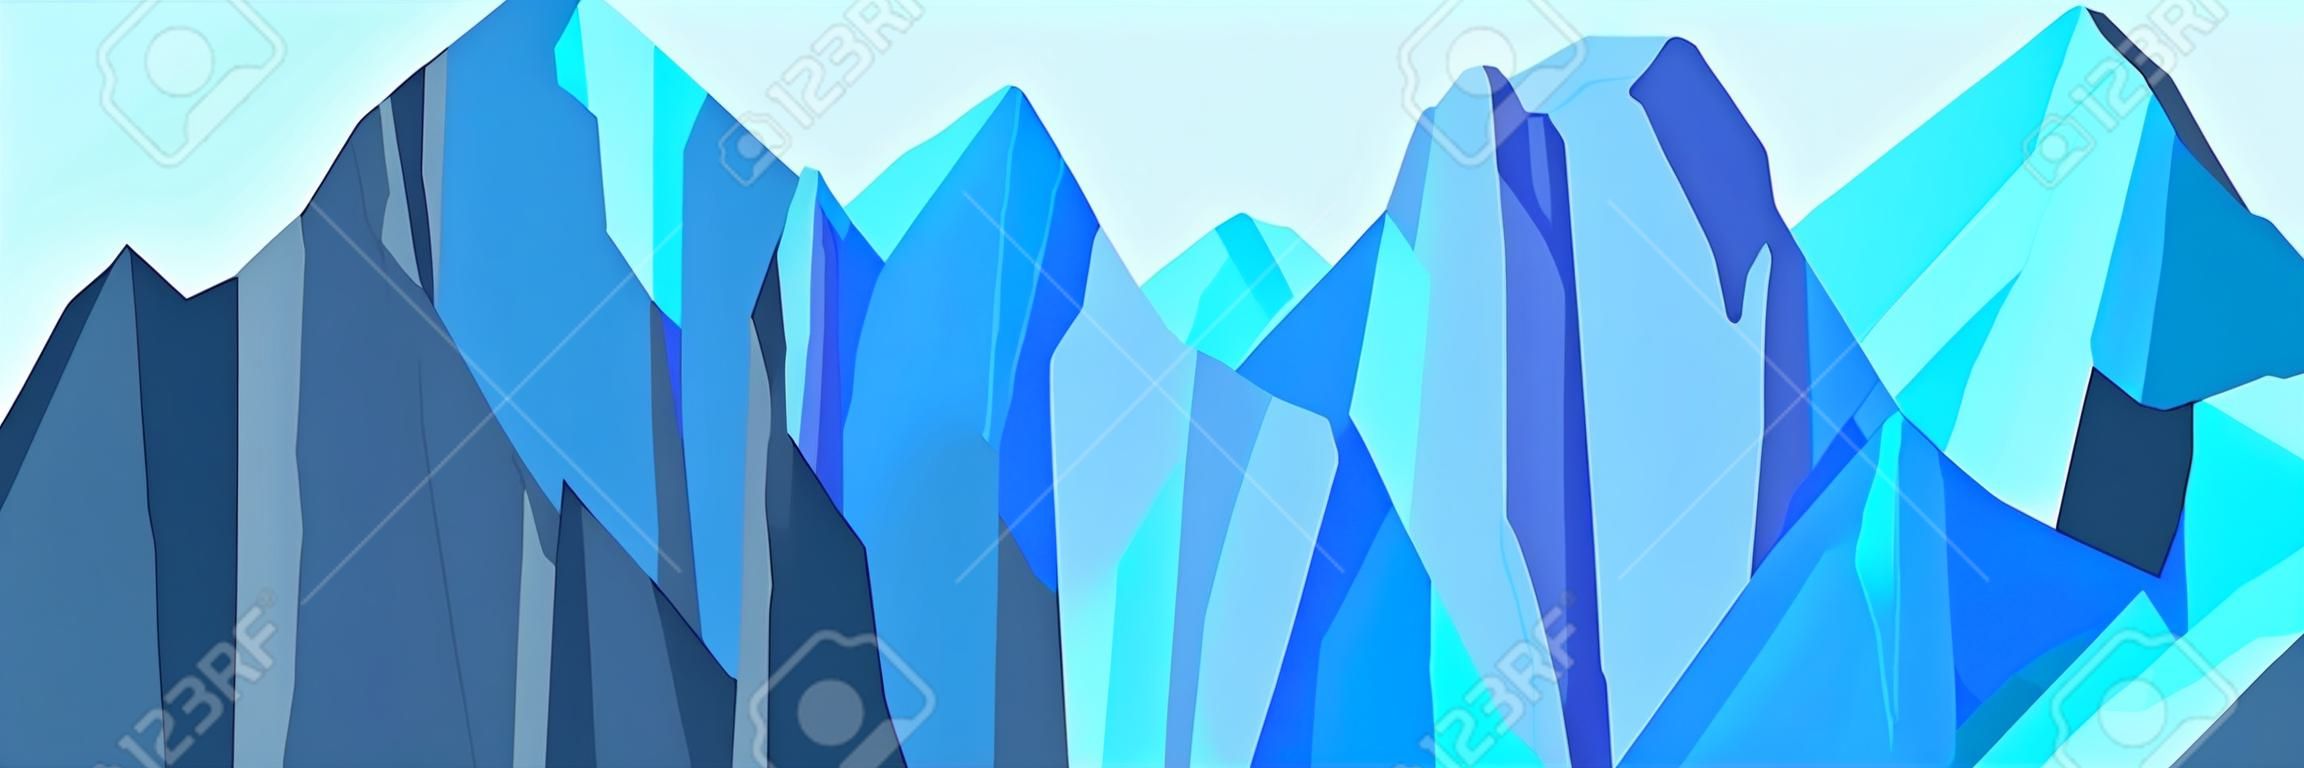 Abstract logo of mountain ranges, blue tones. Vector background